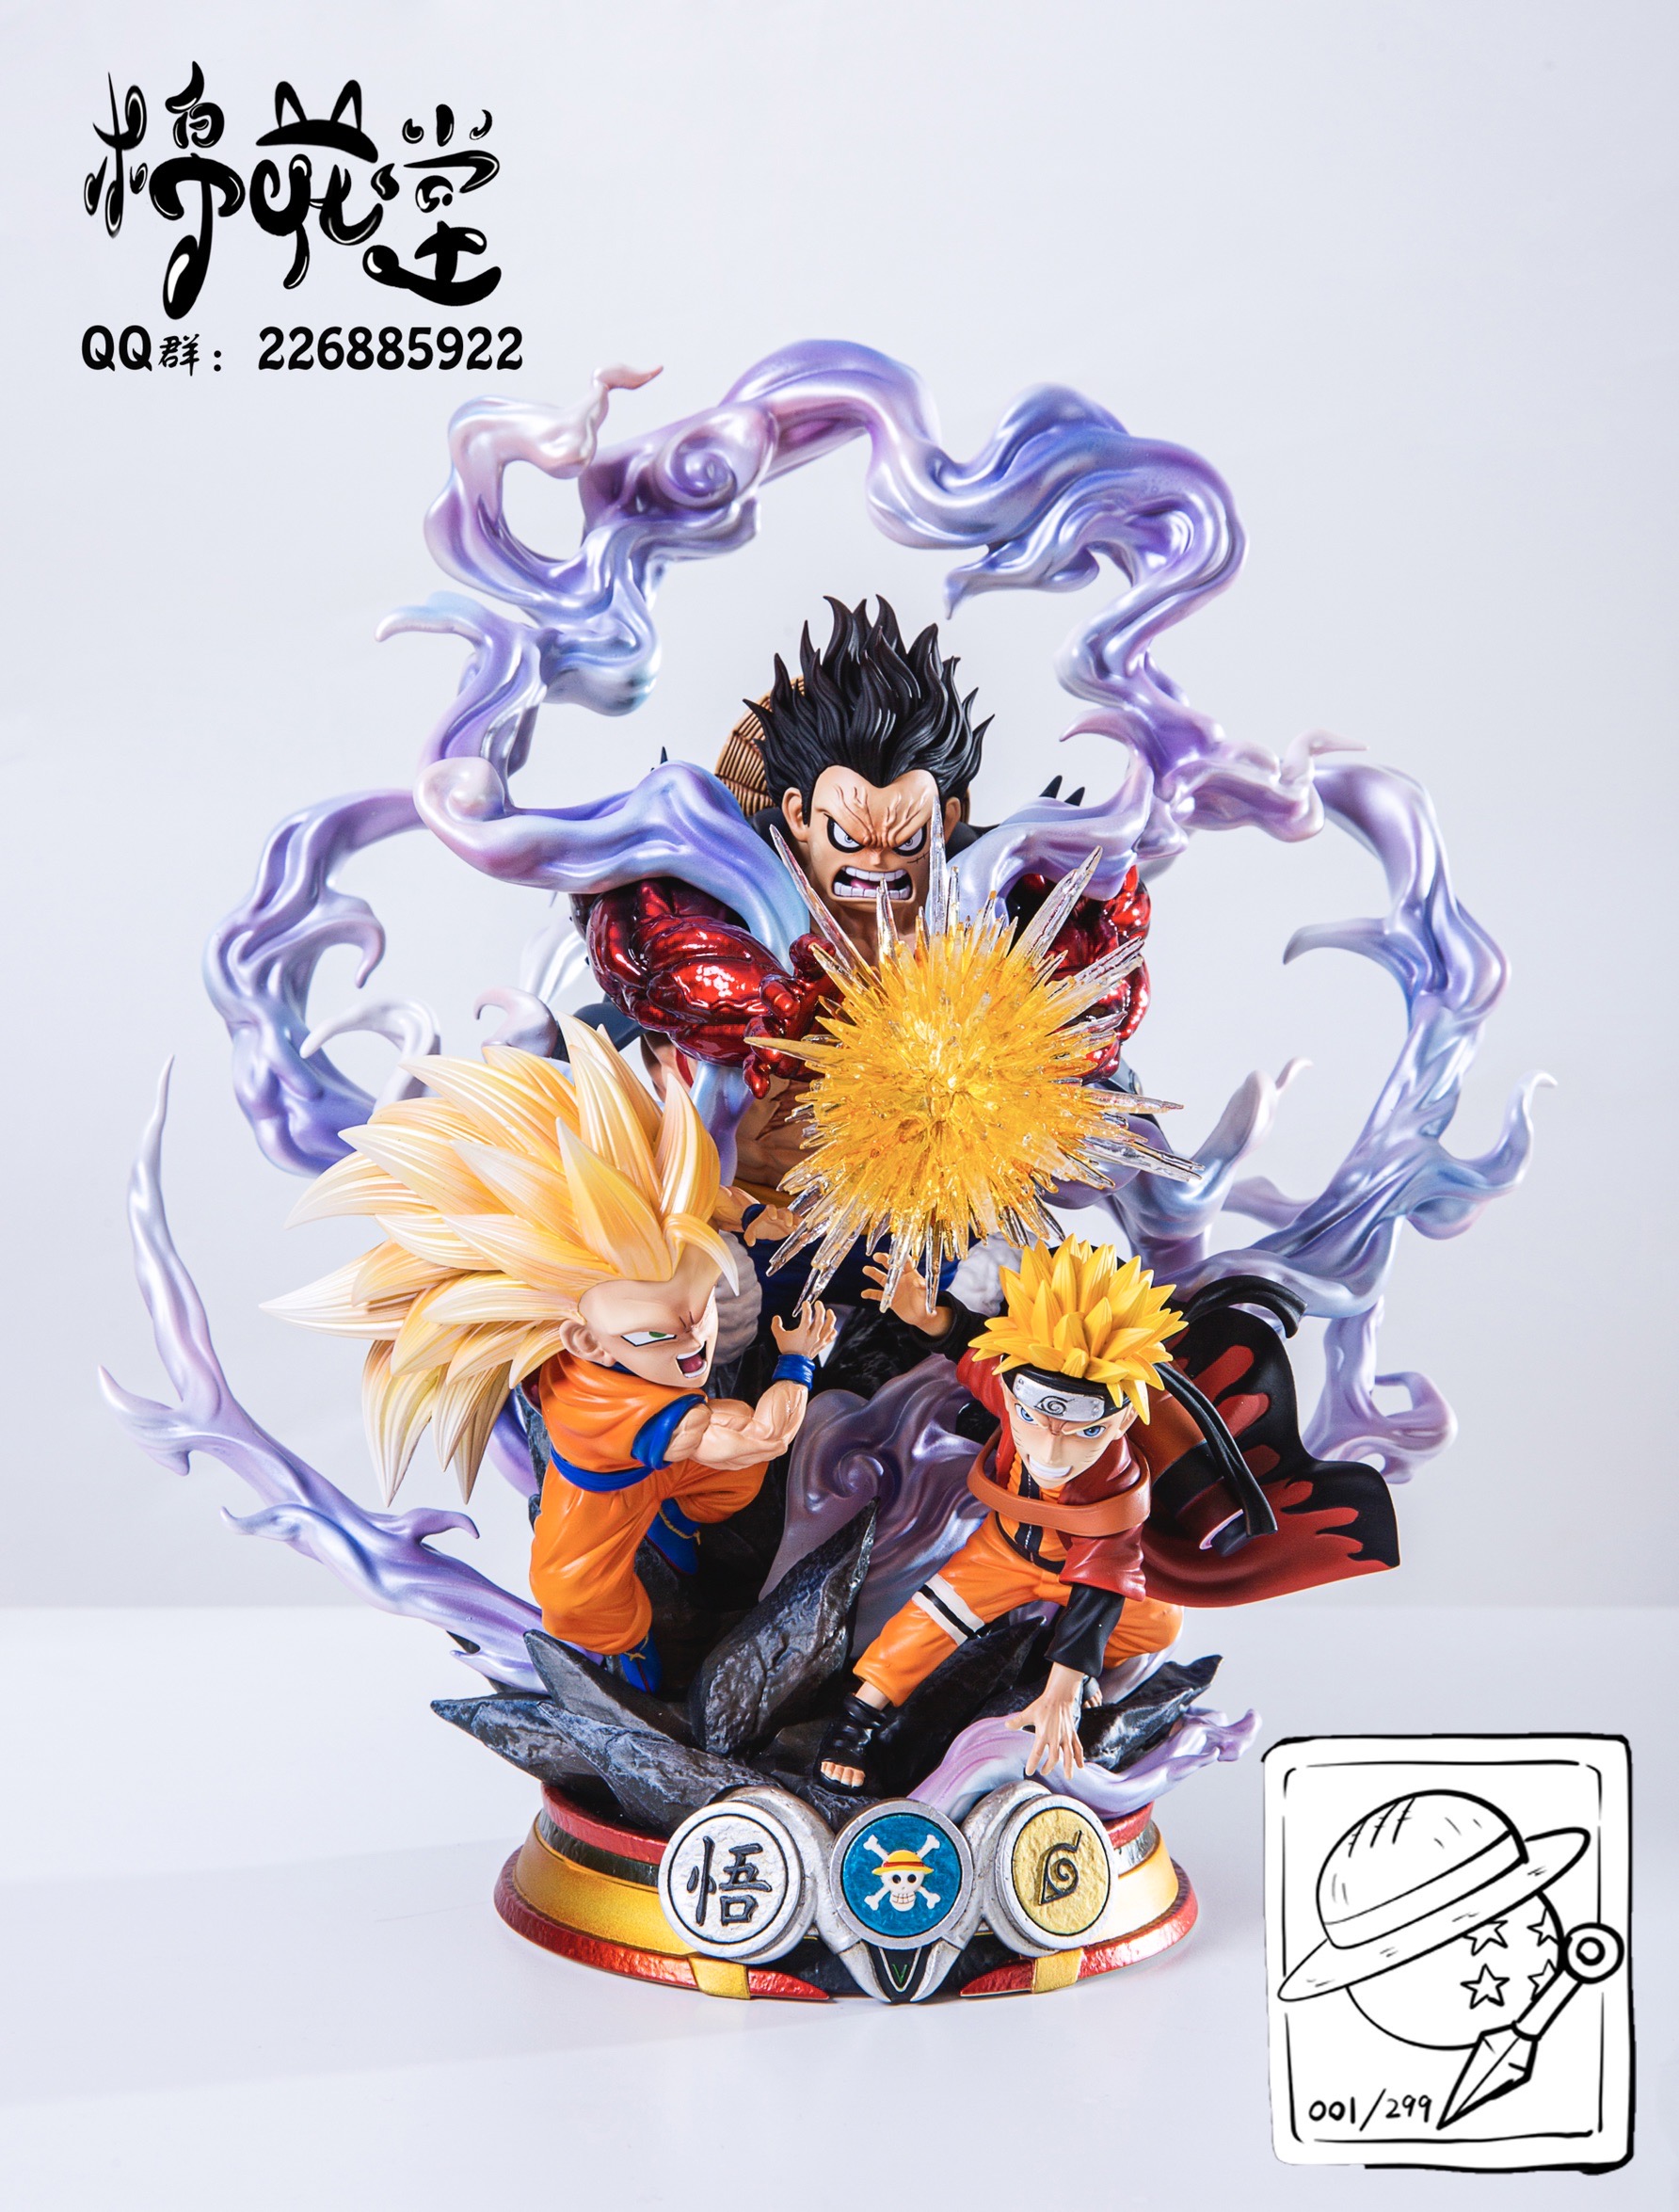 3 in 1 Onepiece Naruto Dragonball by Cotton Hall (มัดจำ) [[SOLD OUT]]